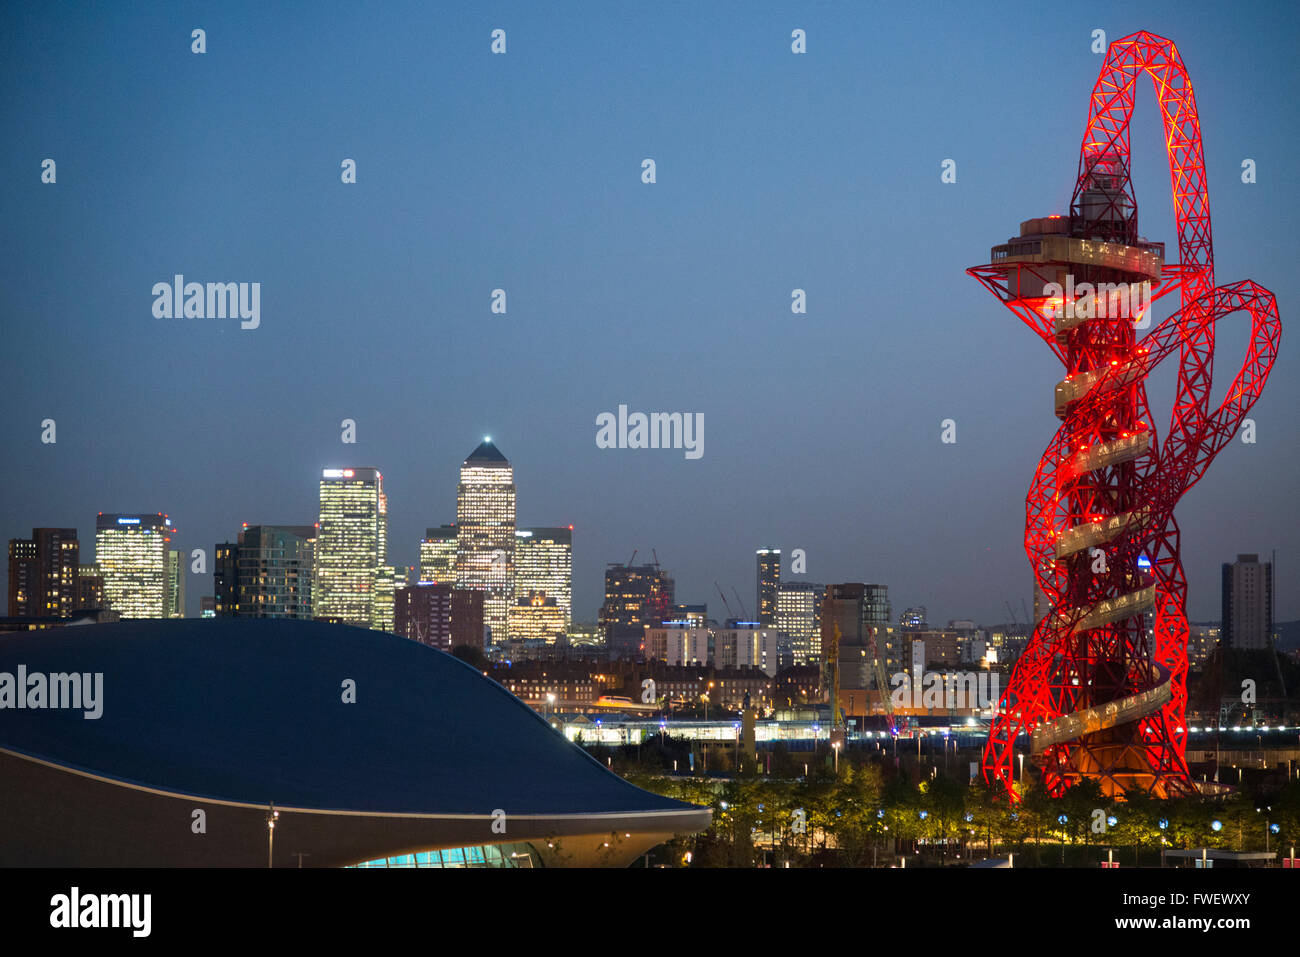 The Arcelormittal Orbit Tower in Queen Elizabeth Olympic Park at dusk, Stratford city, London, United Kingdom, Europe Stock Photo